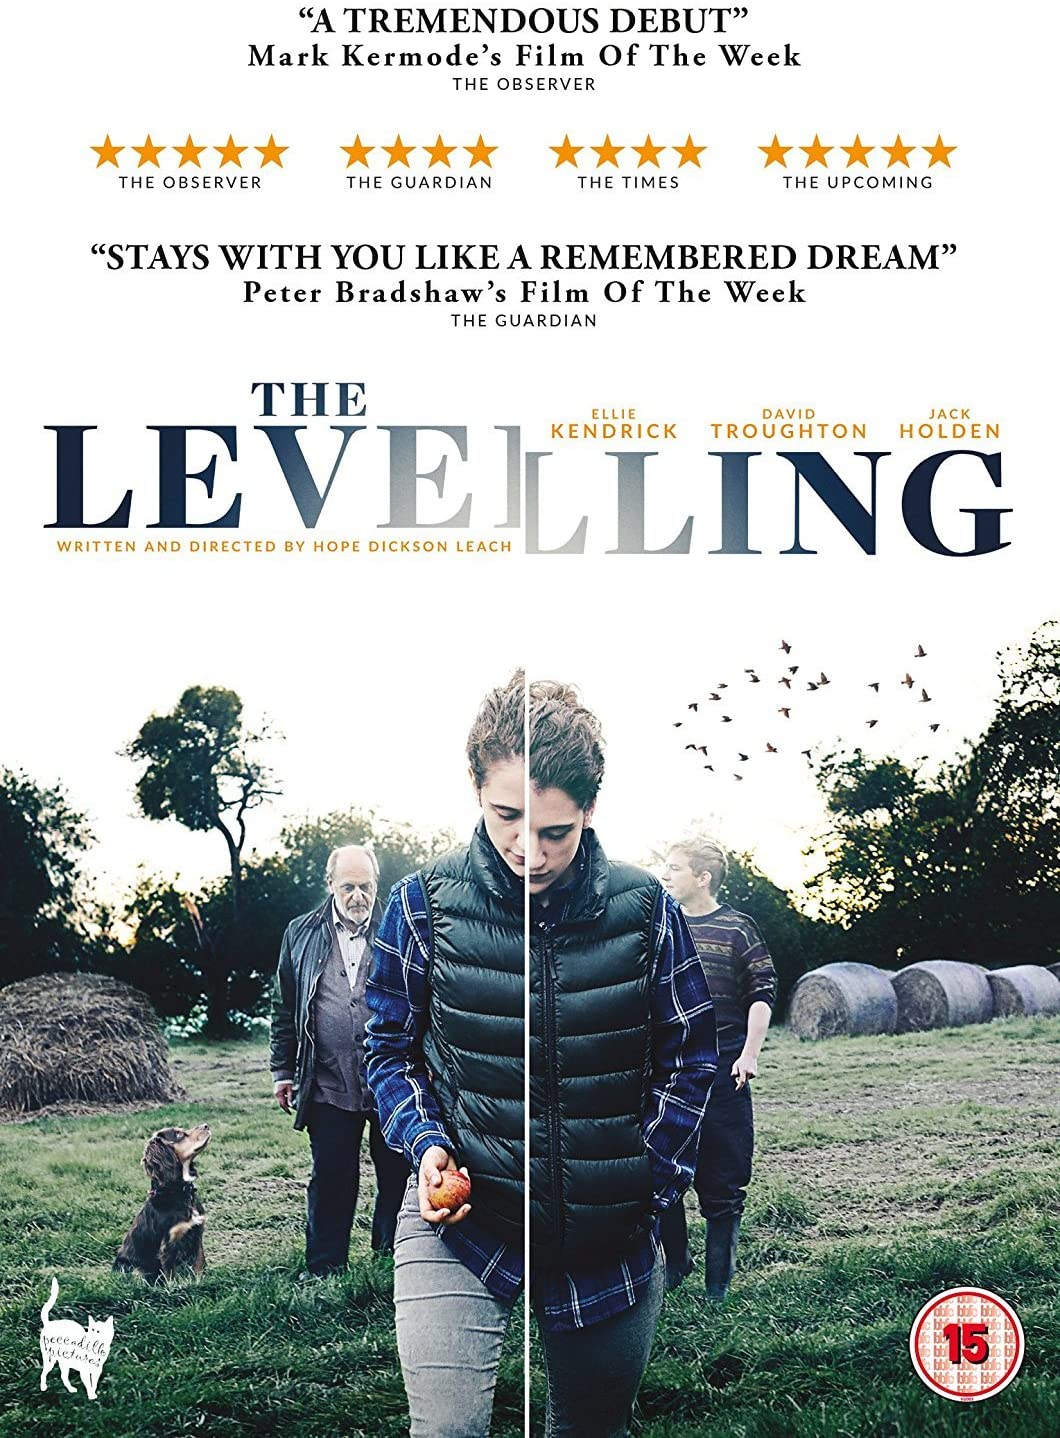 The Levelling - Drama [DVD]